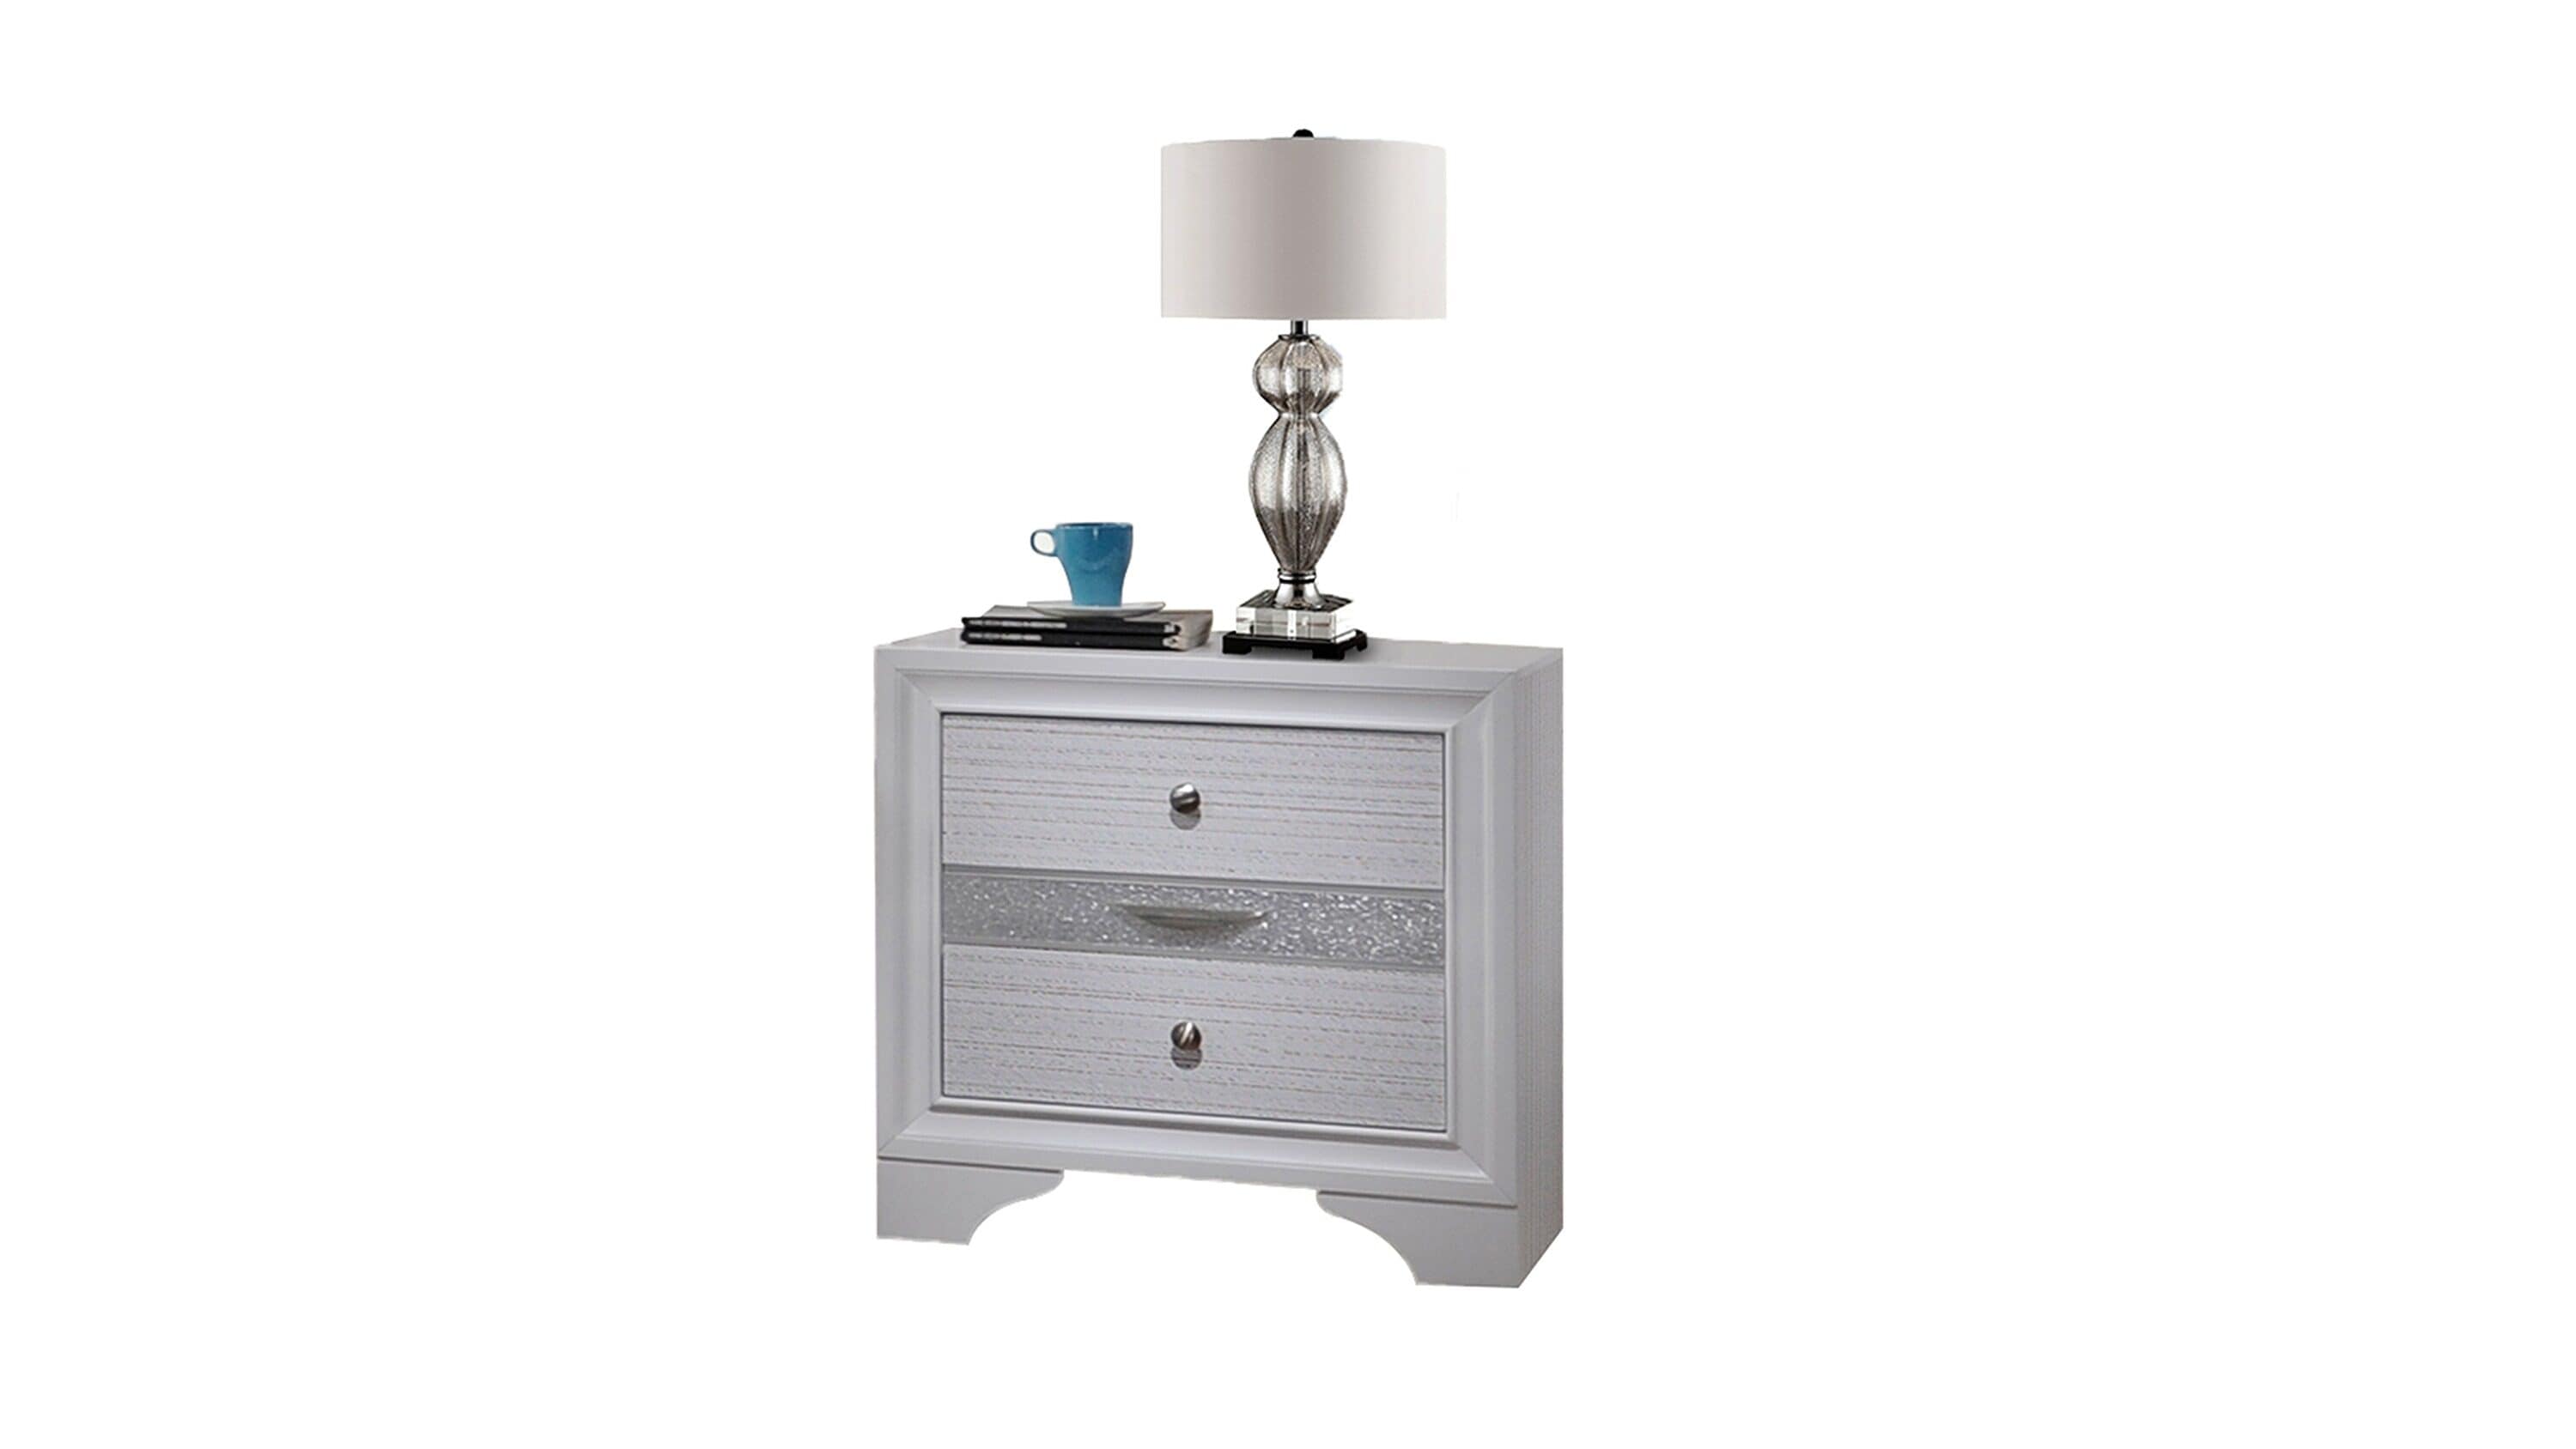 Galaxy Nightstands at Lowes.com